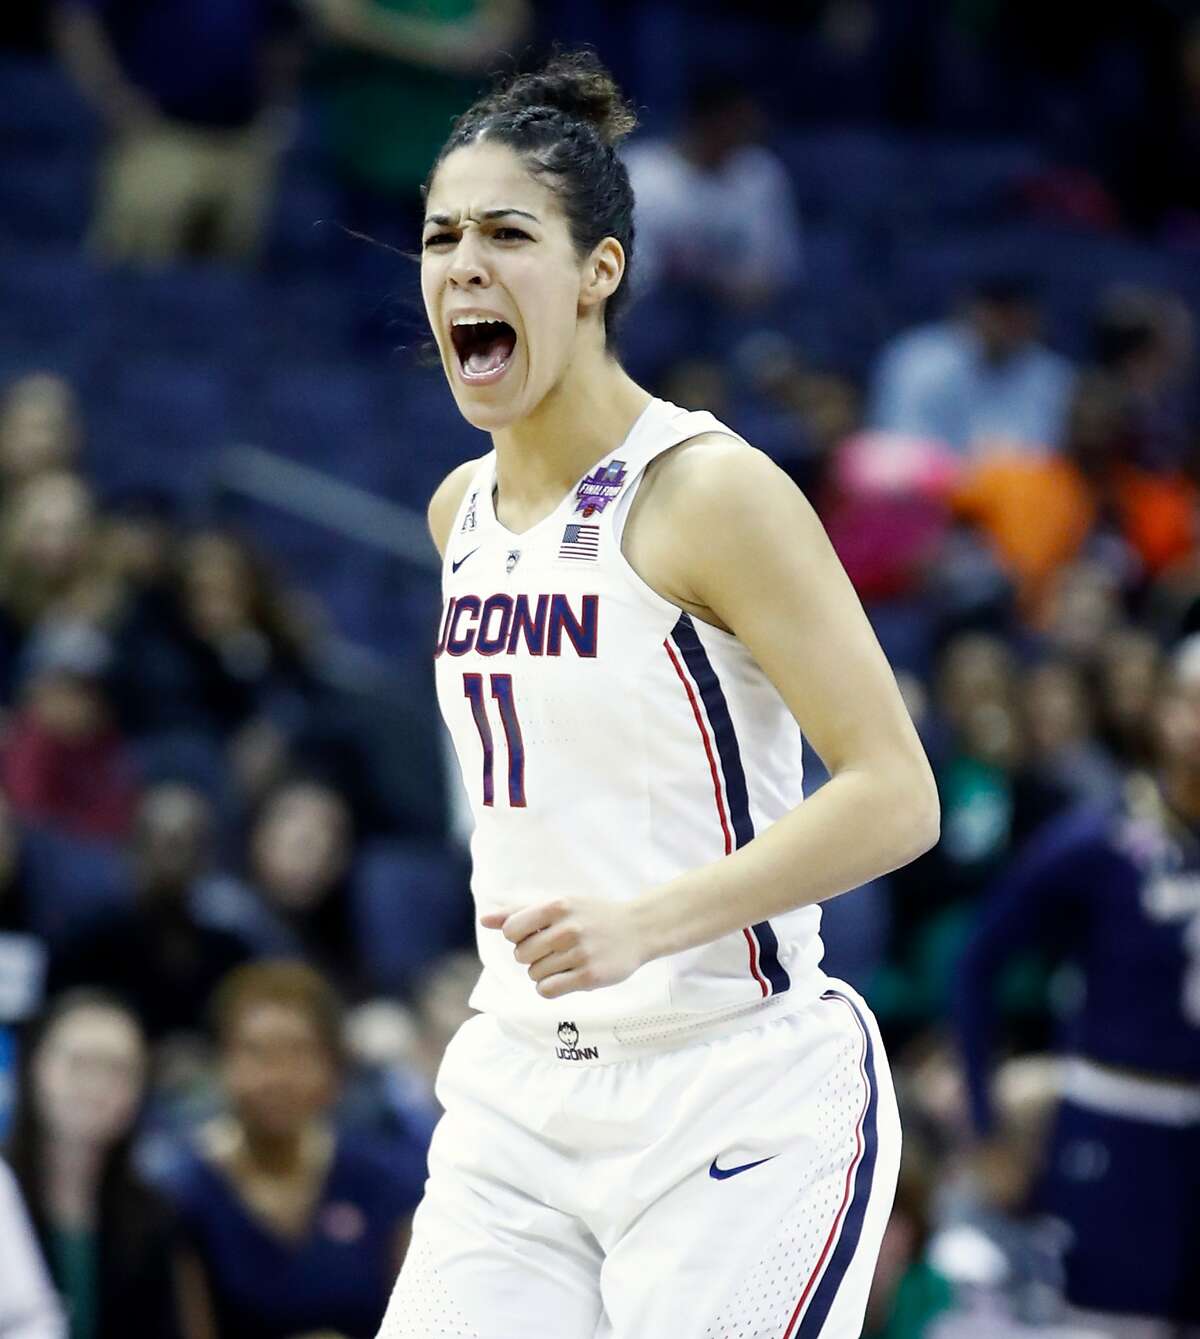 COLUMBUS, OH - MARCH 30: Kia Nurse #11 of the Connecticut Huskies celebrates after hiting the game tieing basket late in the second half to force overtime against the Notre Dame Fighting Irish in the semifinals of the 2018 NCAA Women's Final Four at Nationwide Arena on March 30, 2018 in Columbus, Ohio. The Notre Dame Fighting Irish defeated the Connecticut Huskies 91-89. (Photo by Andy Lyons/Getty Images)